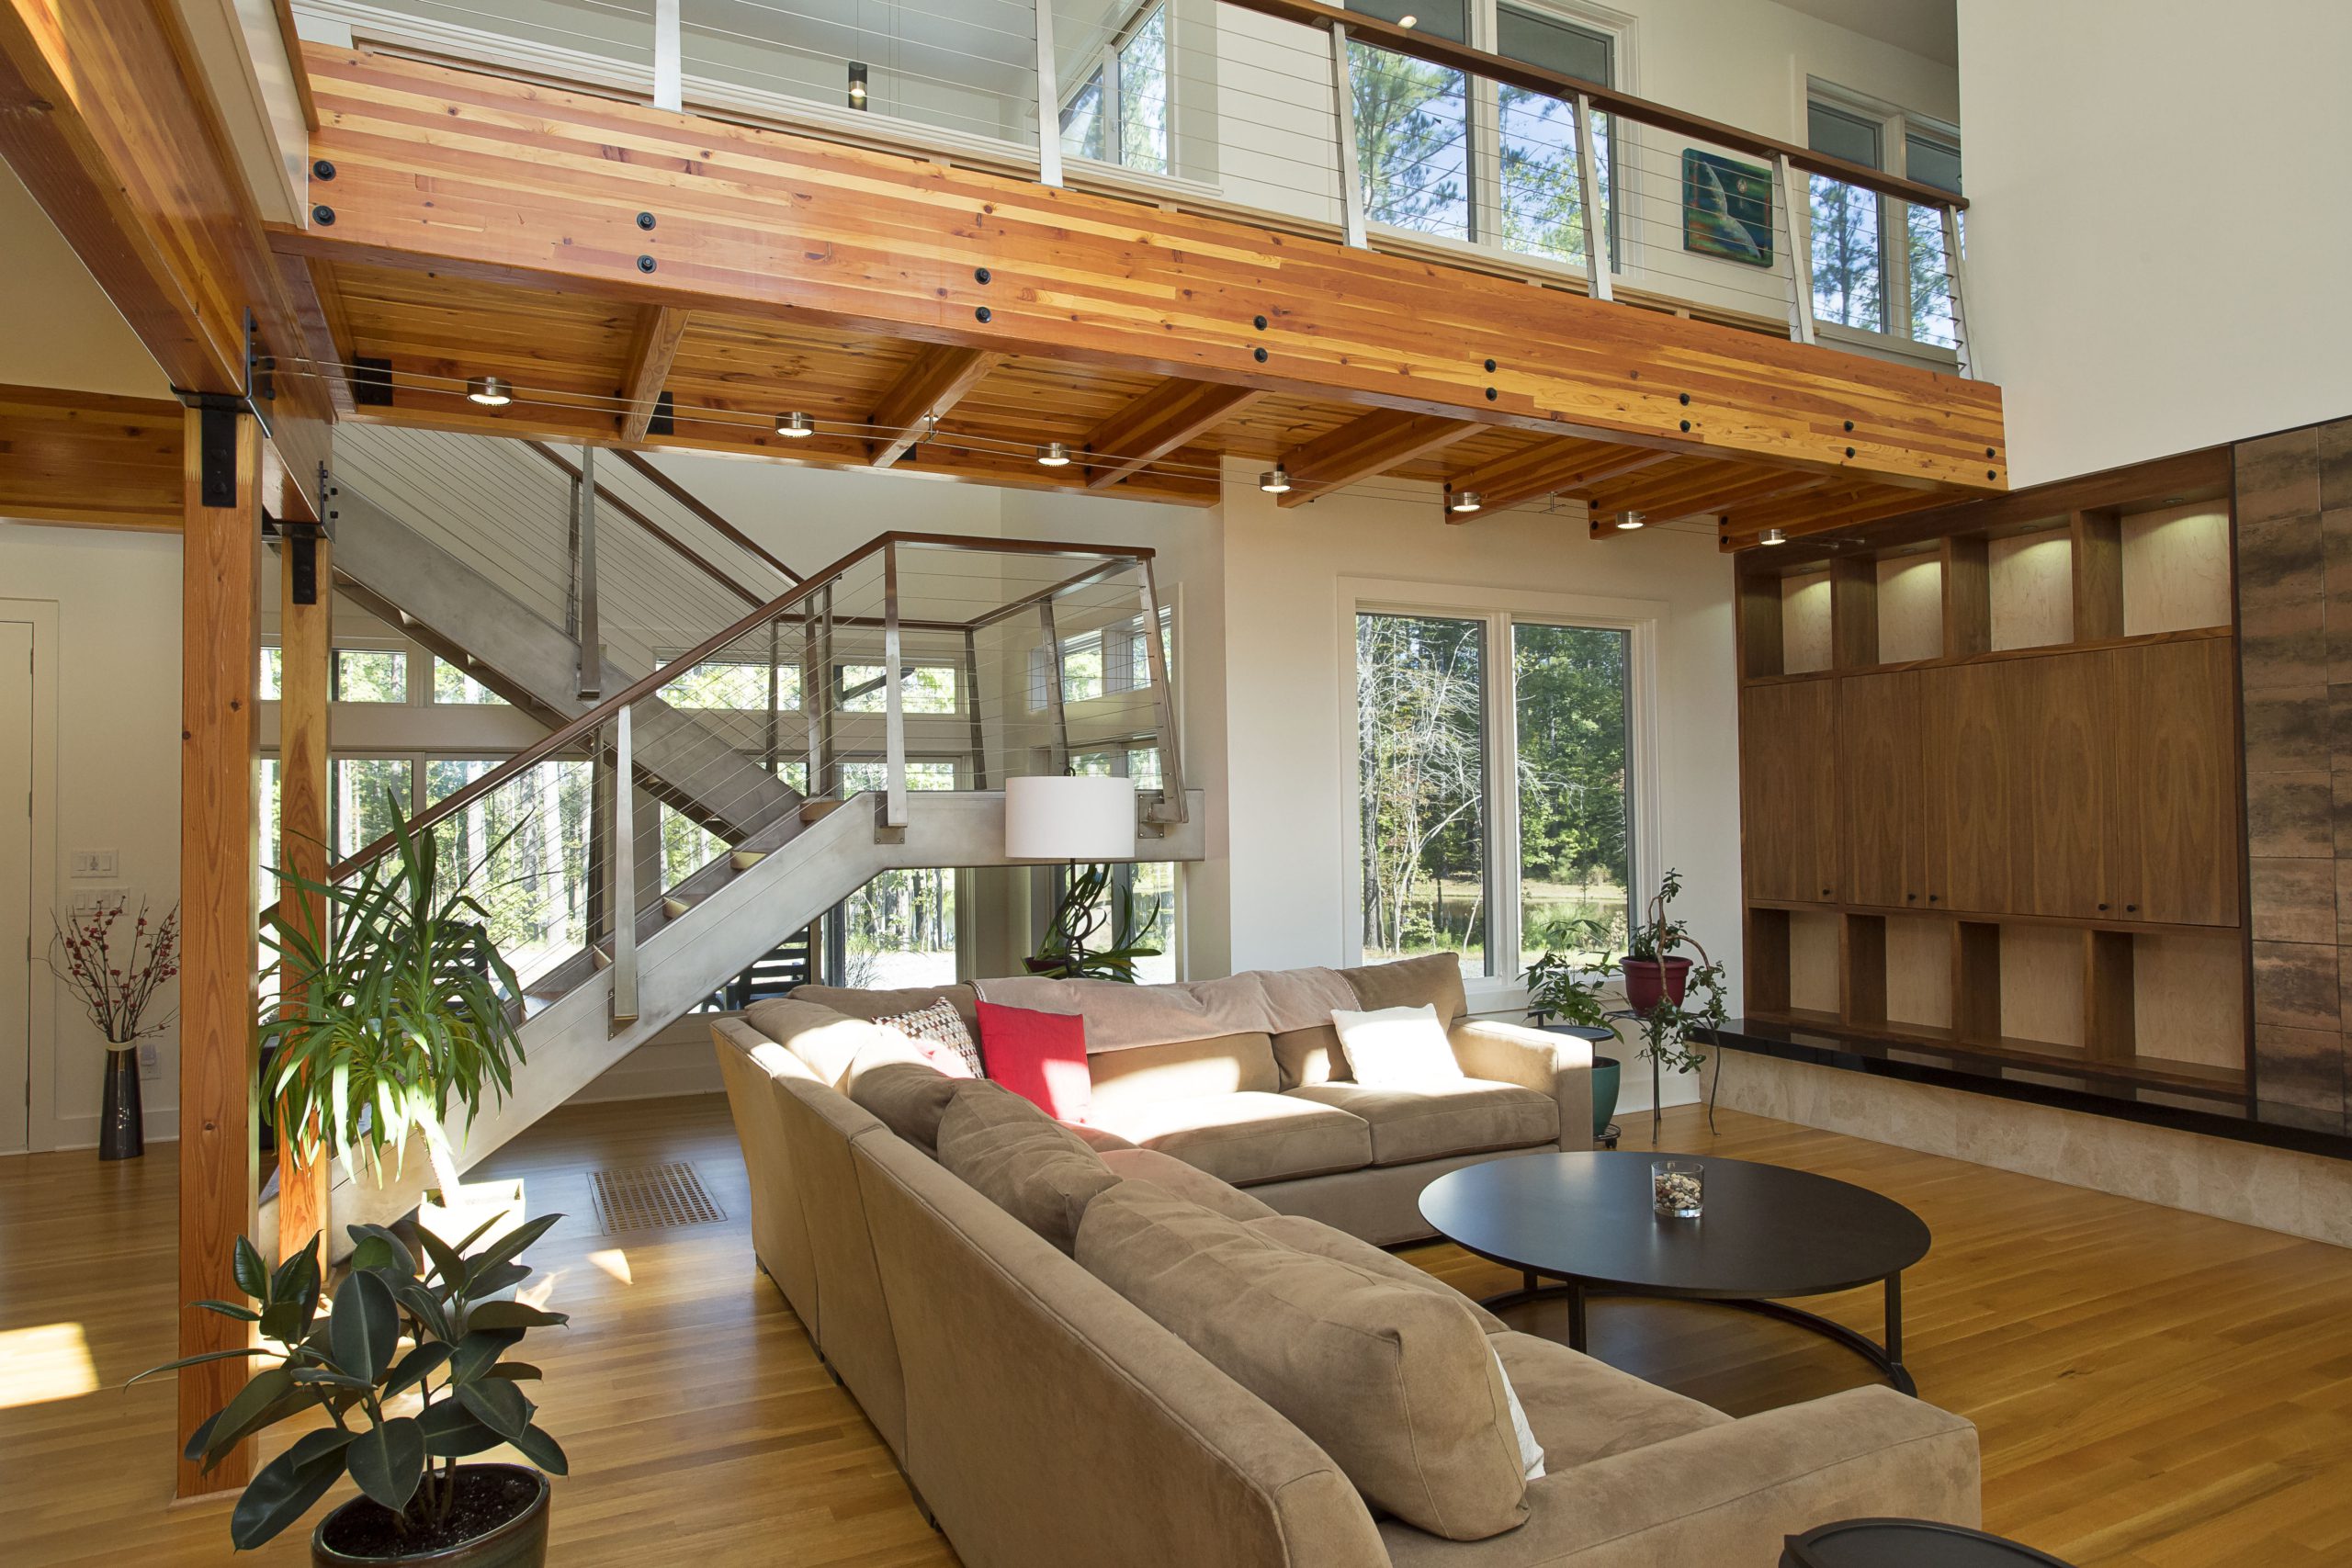 Glulam catwalk and steel staircase with cable railing in living room